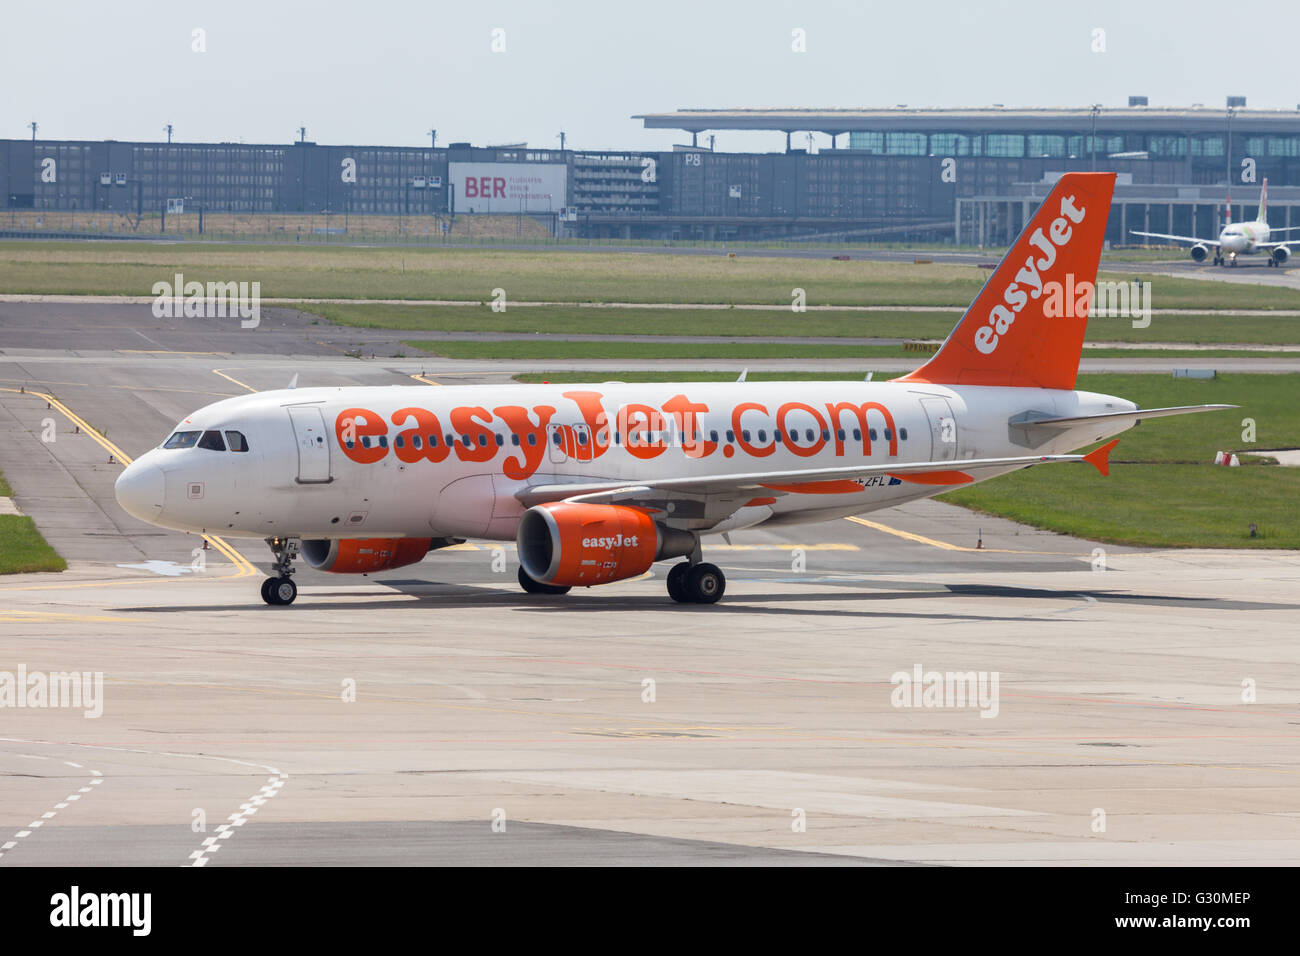 BERLIN / GERMANY - JUNE 4, 2016: Airbus A 320 - 214 from easyJet on airport Schoenefeld, Berlin / Germany on june 4, 2016 Stock Photo